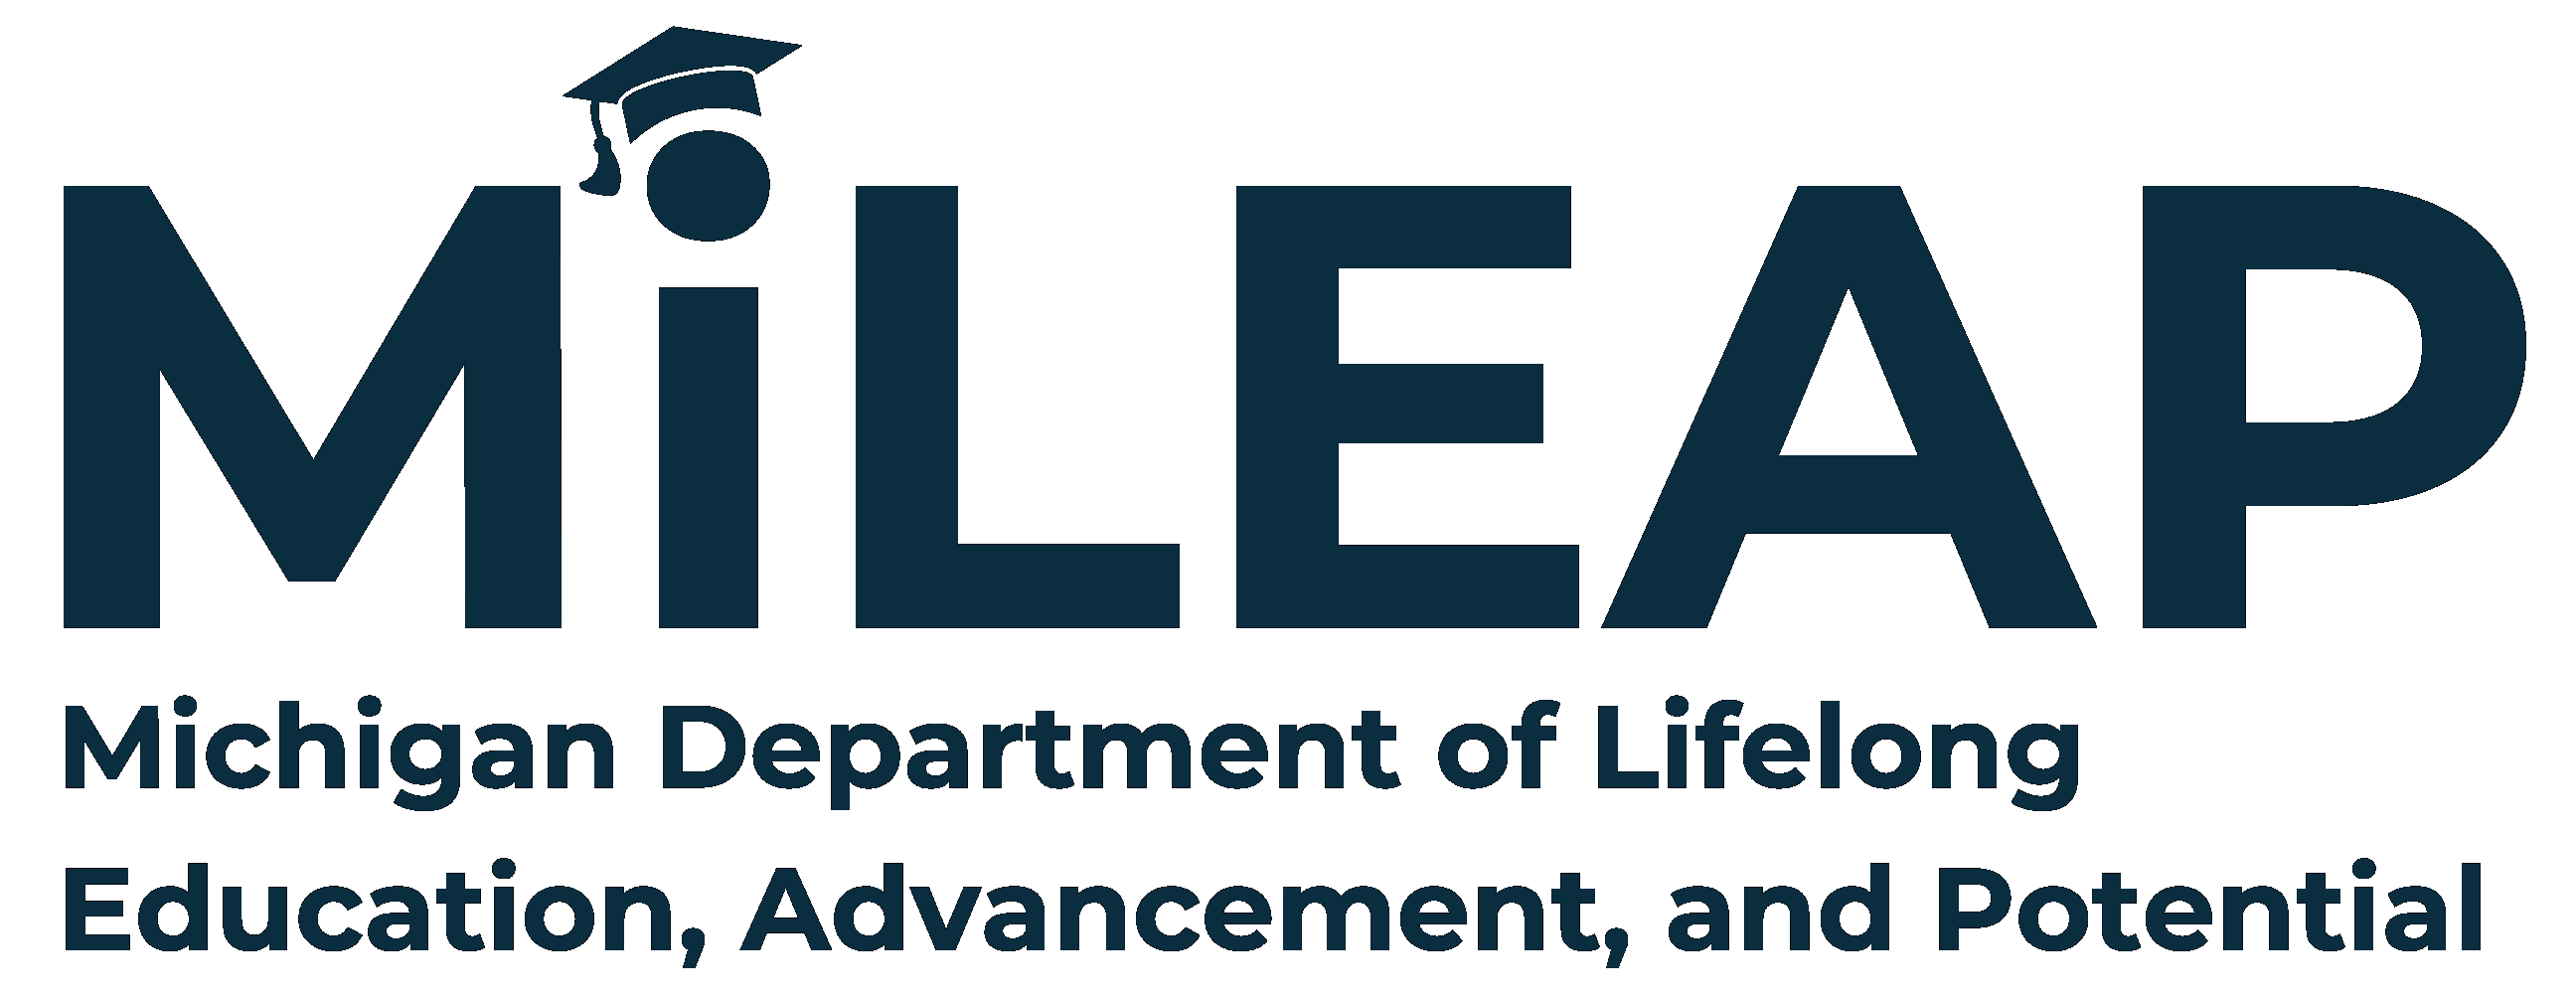 Michigan Department of Lifelong Education, Advancement and Potential (MiLEAP) Logo